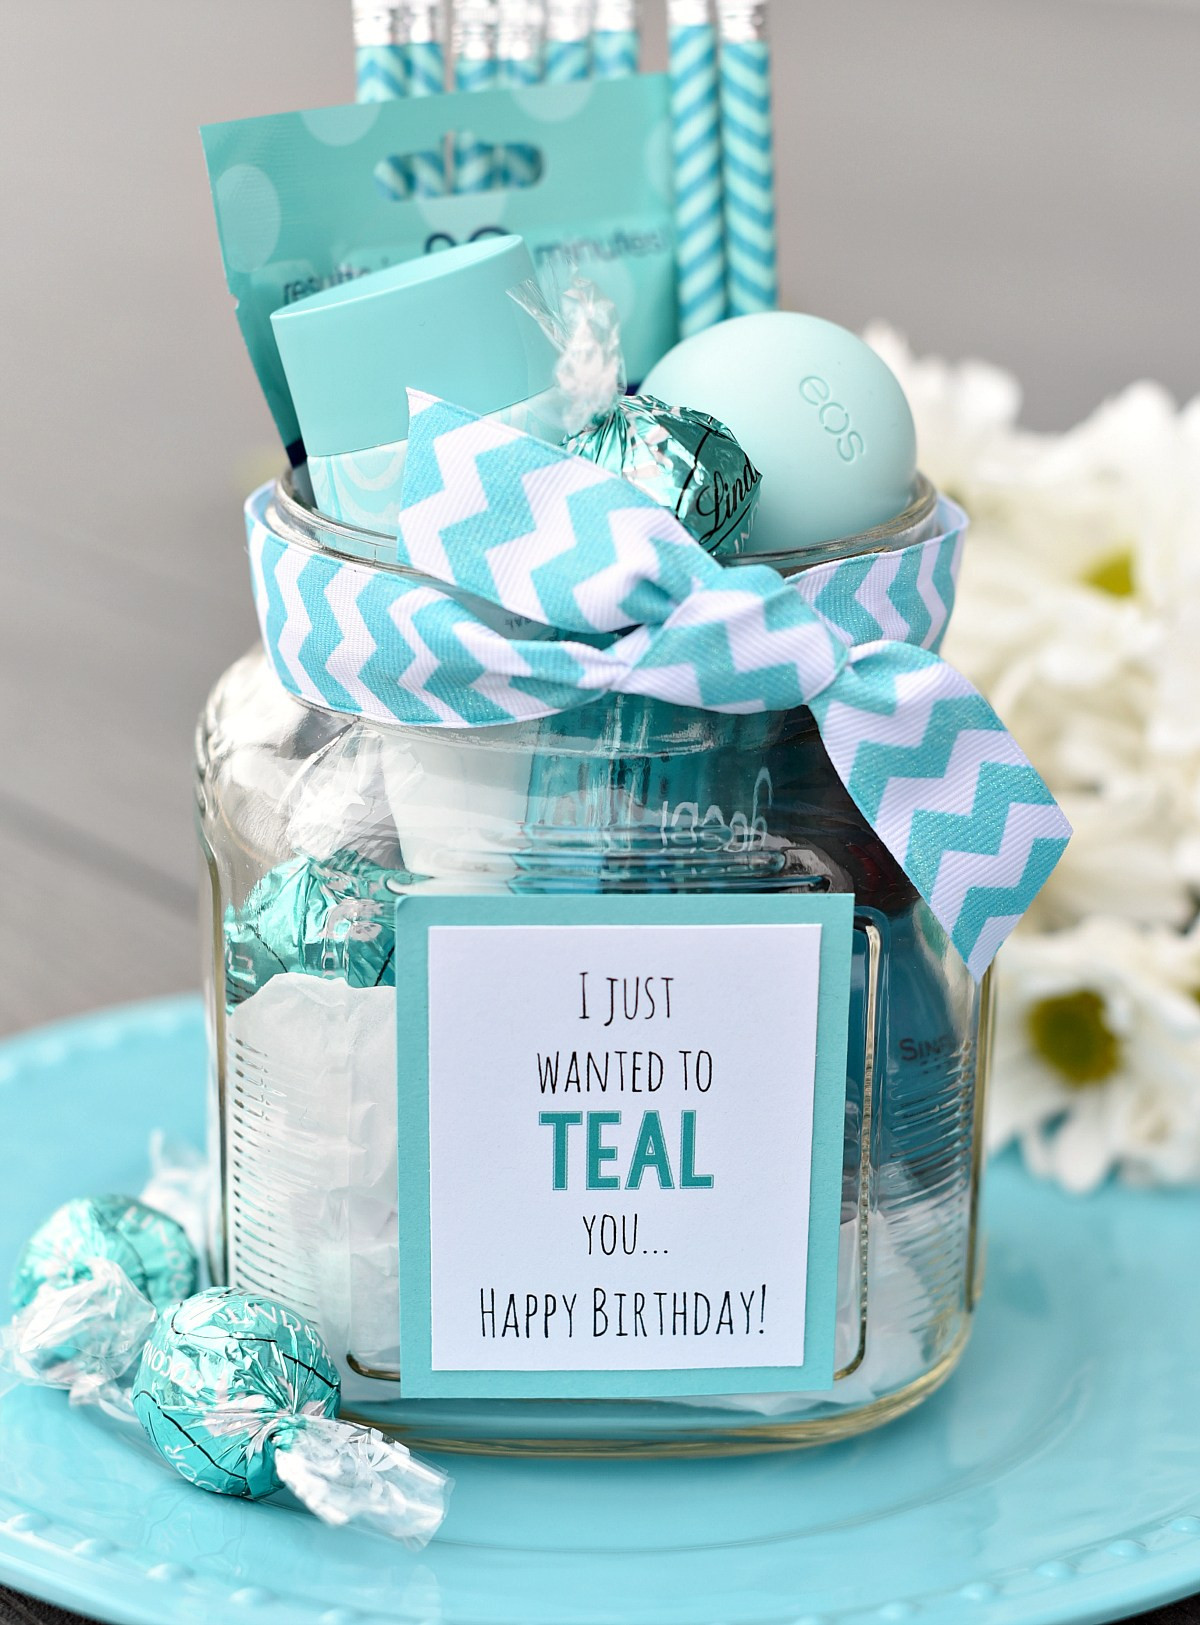 Gifts For Best Friend Birthday
 Teal Birthday Gift Idea for Friends – Fun Squared